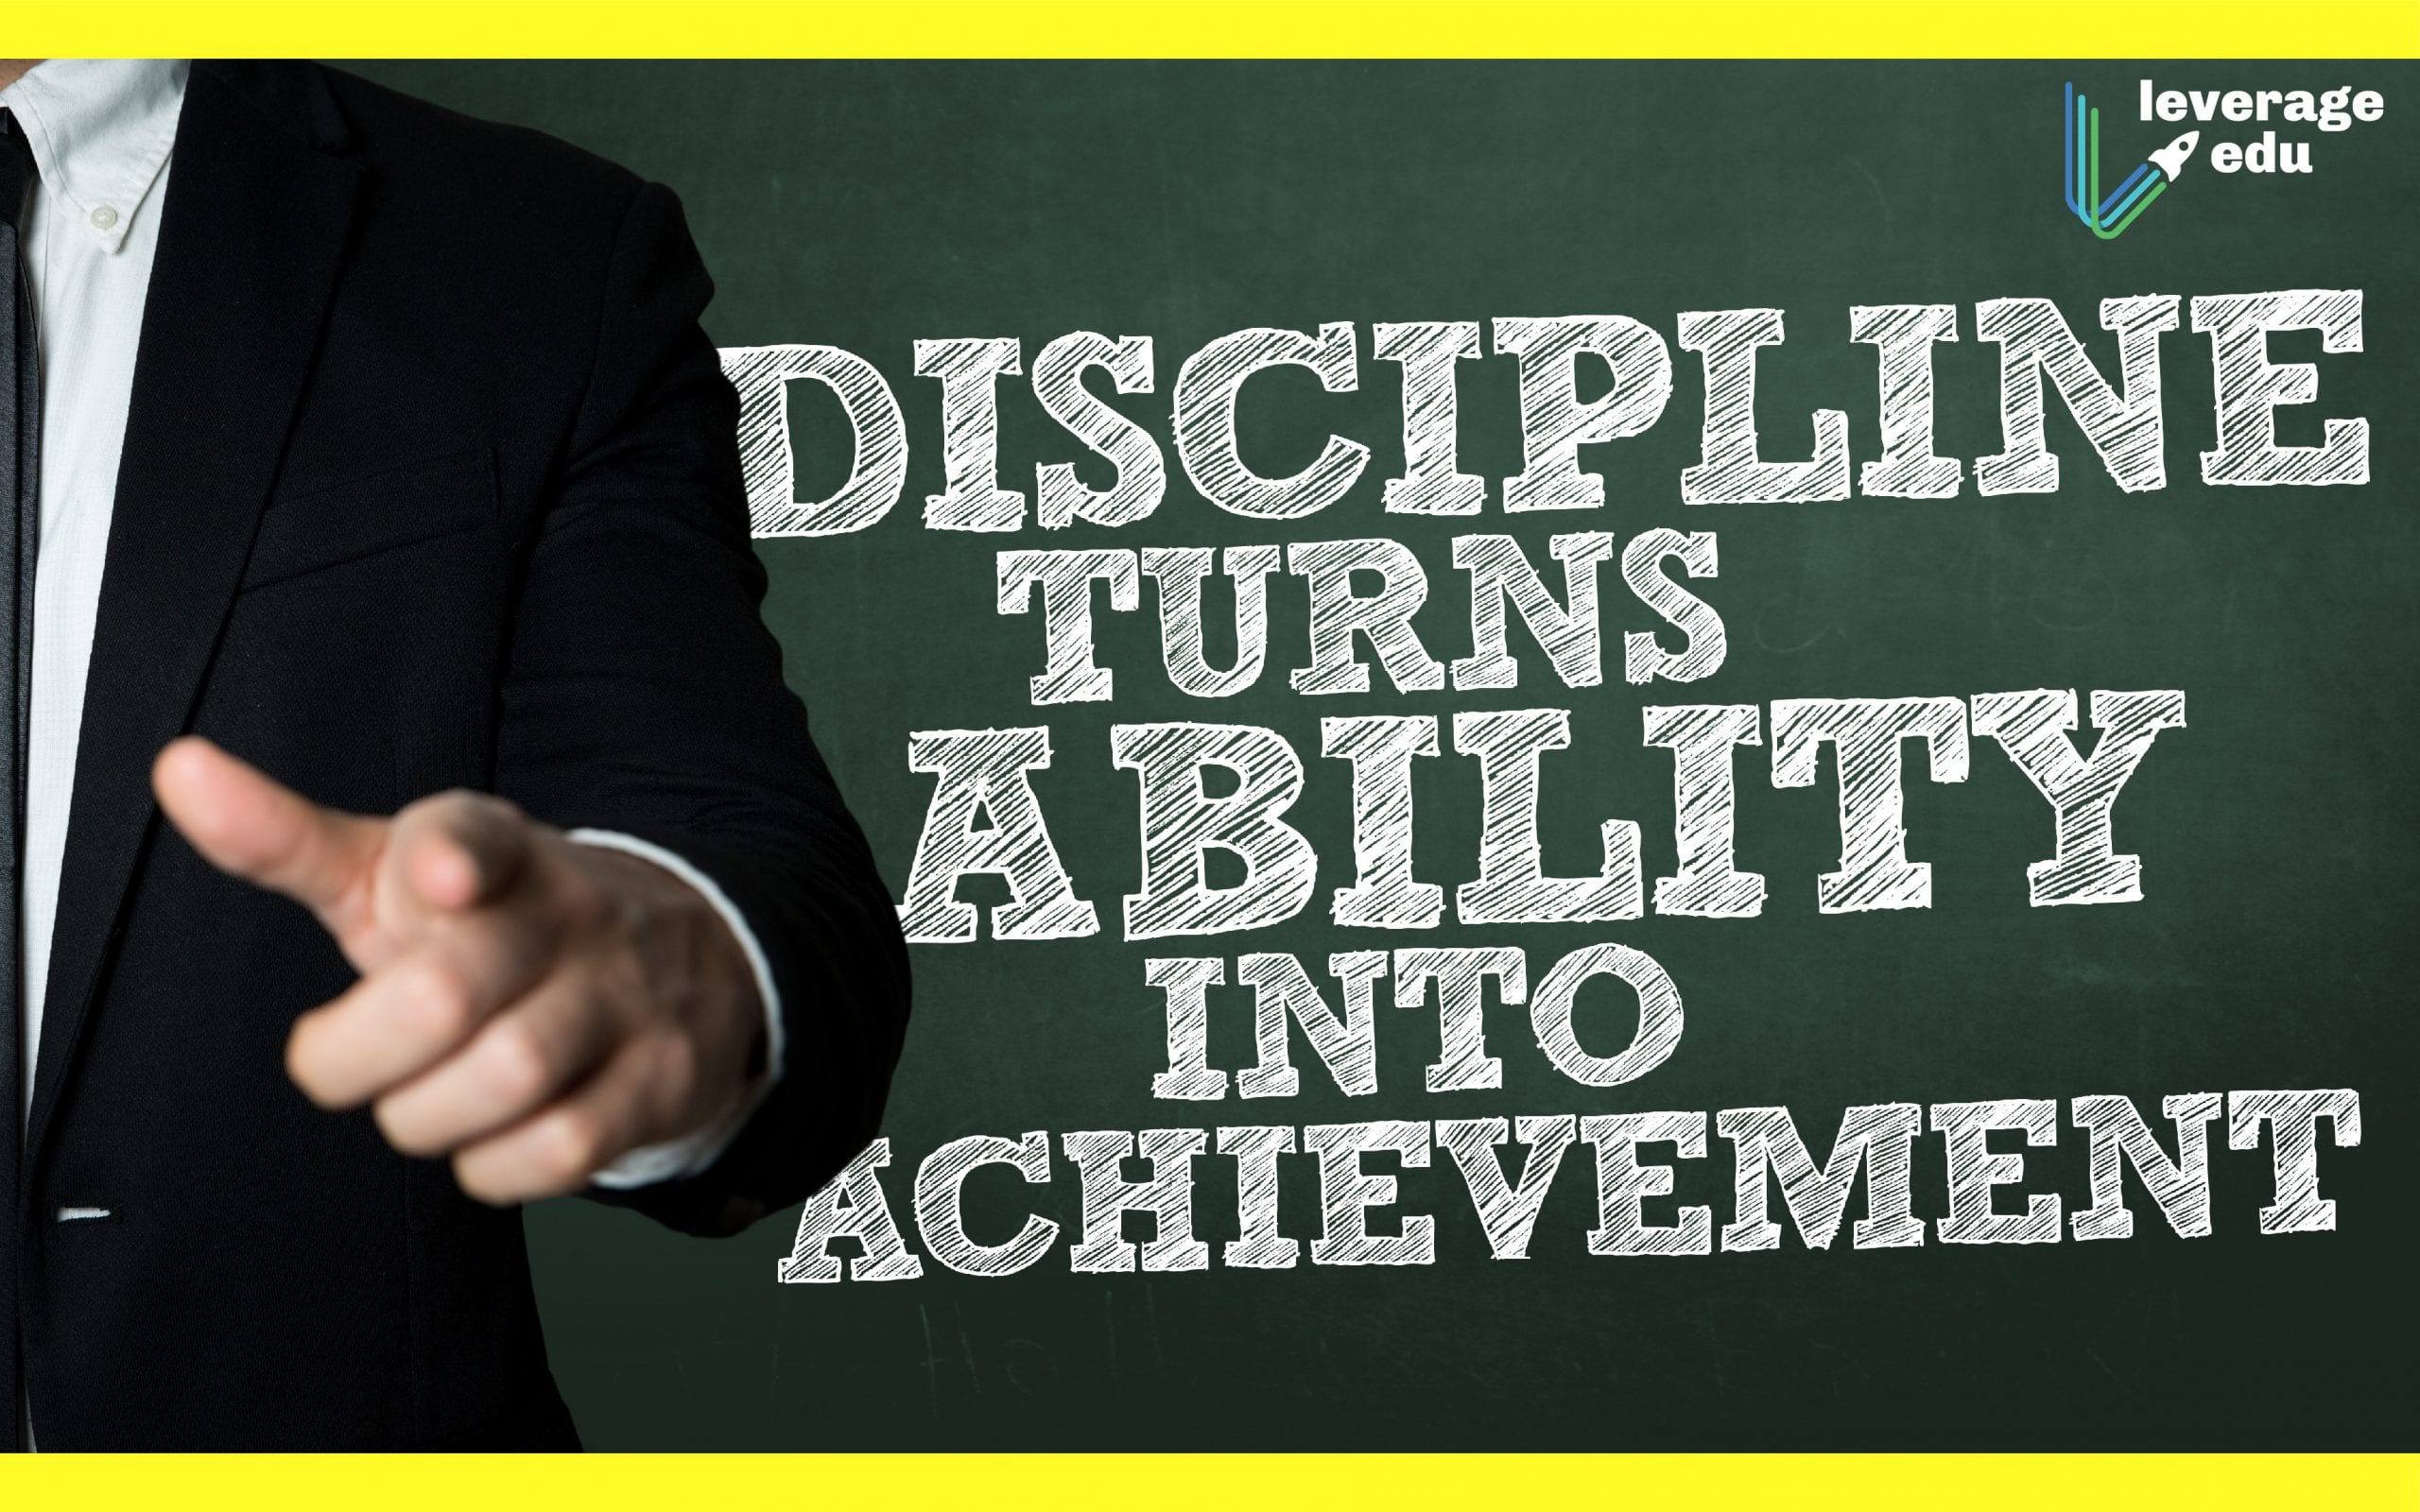 speech writing importance of discipline in students life